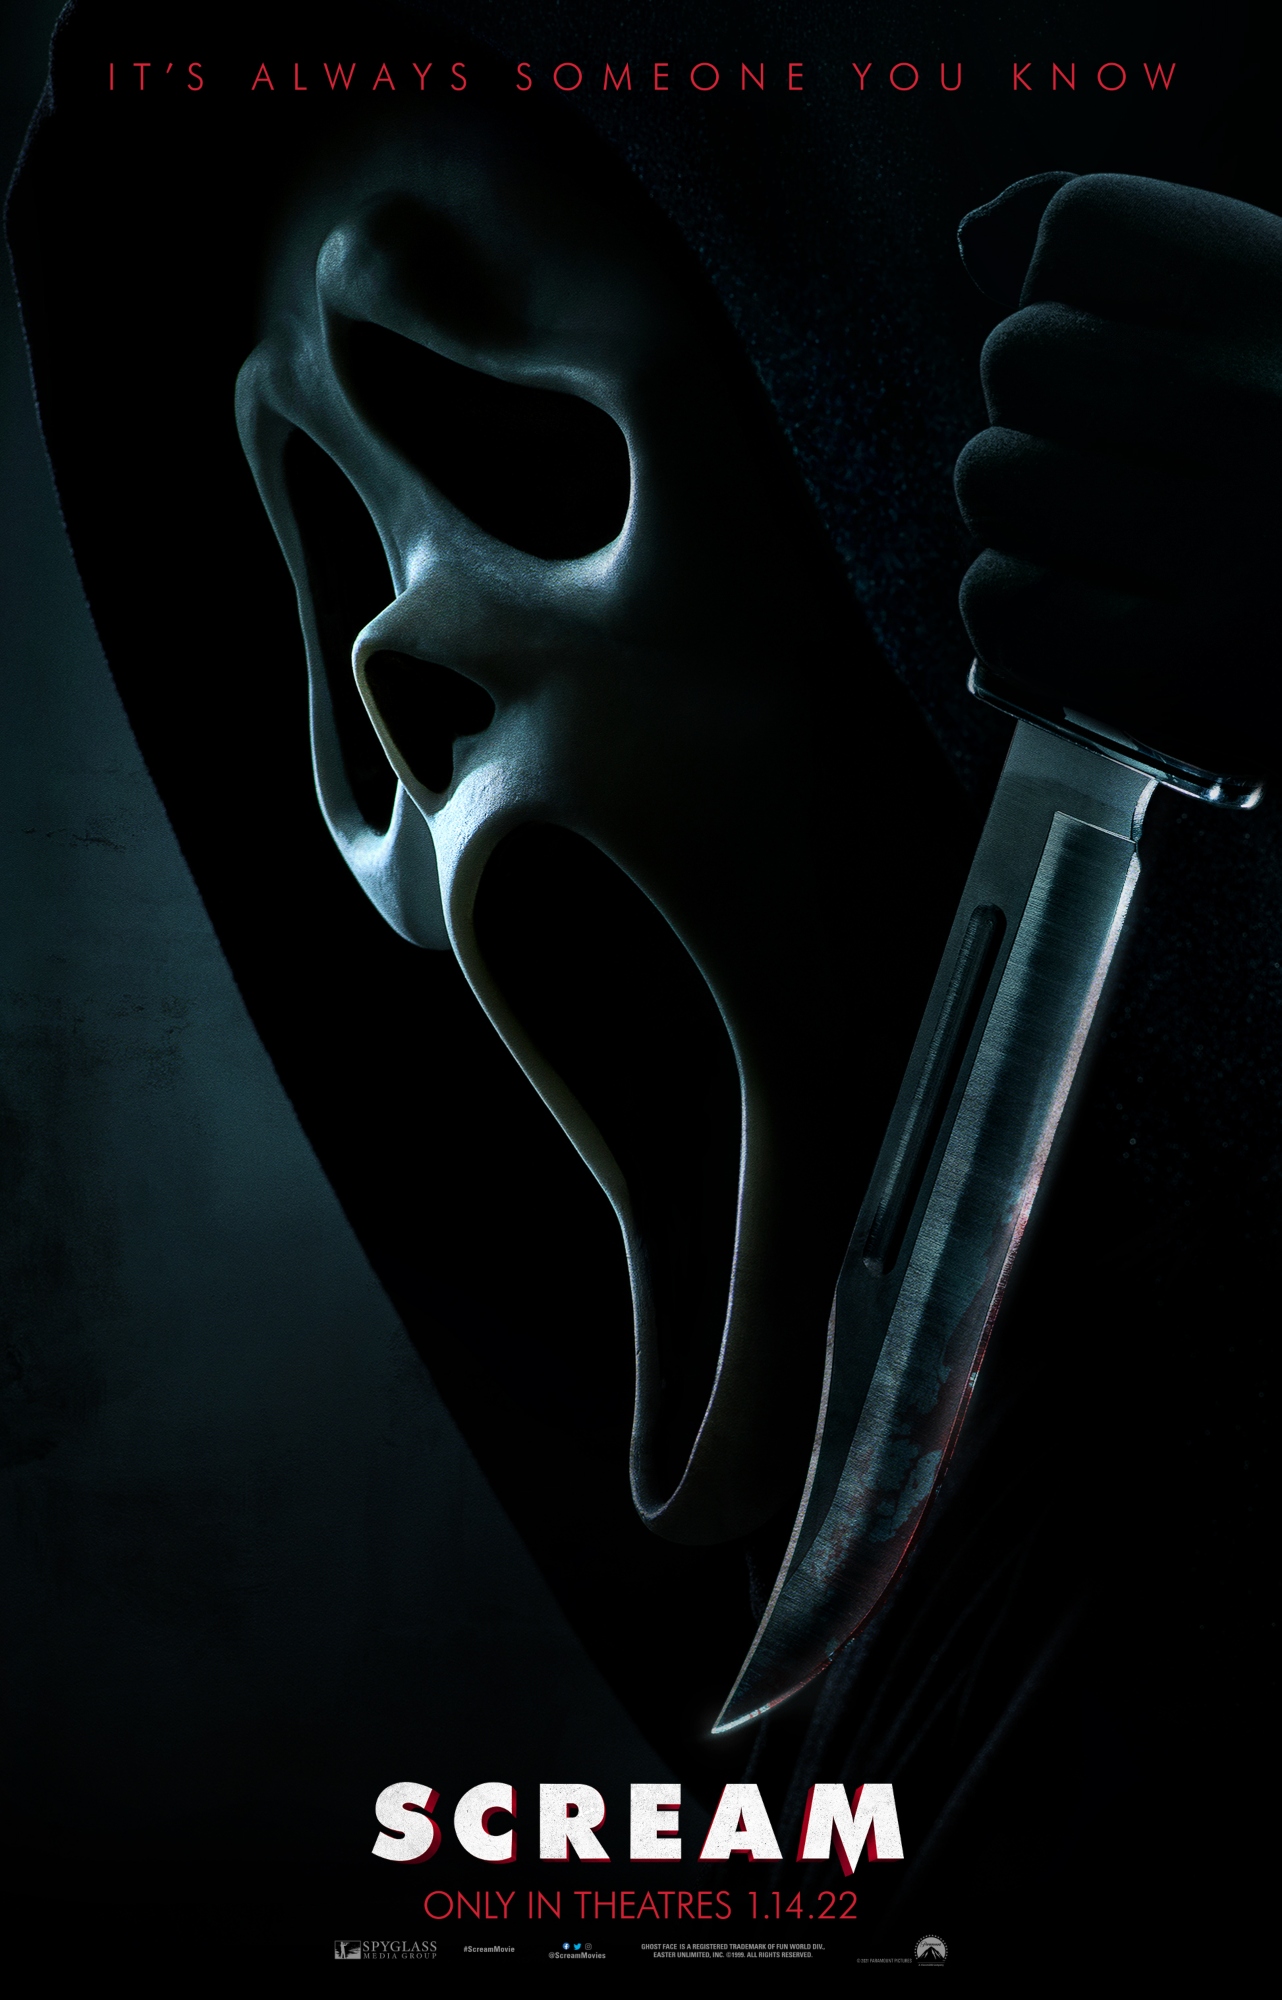 Scream 5 poster featuring a masked cast member as Ghostface